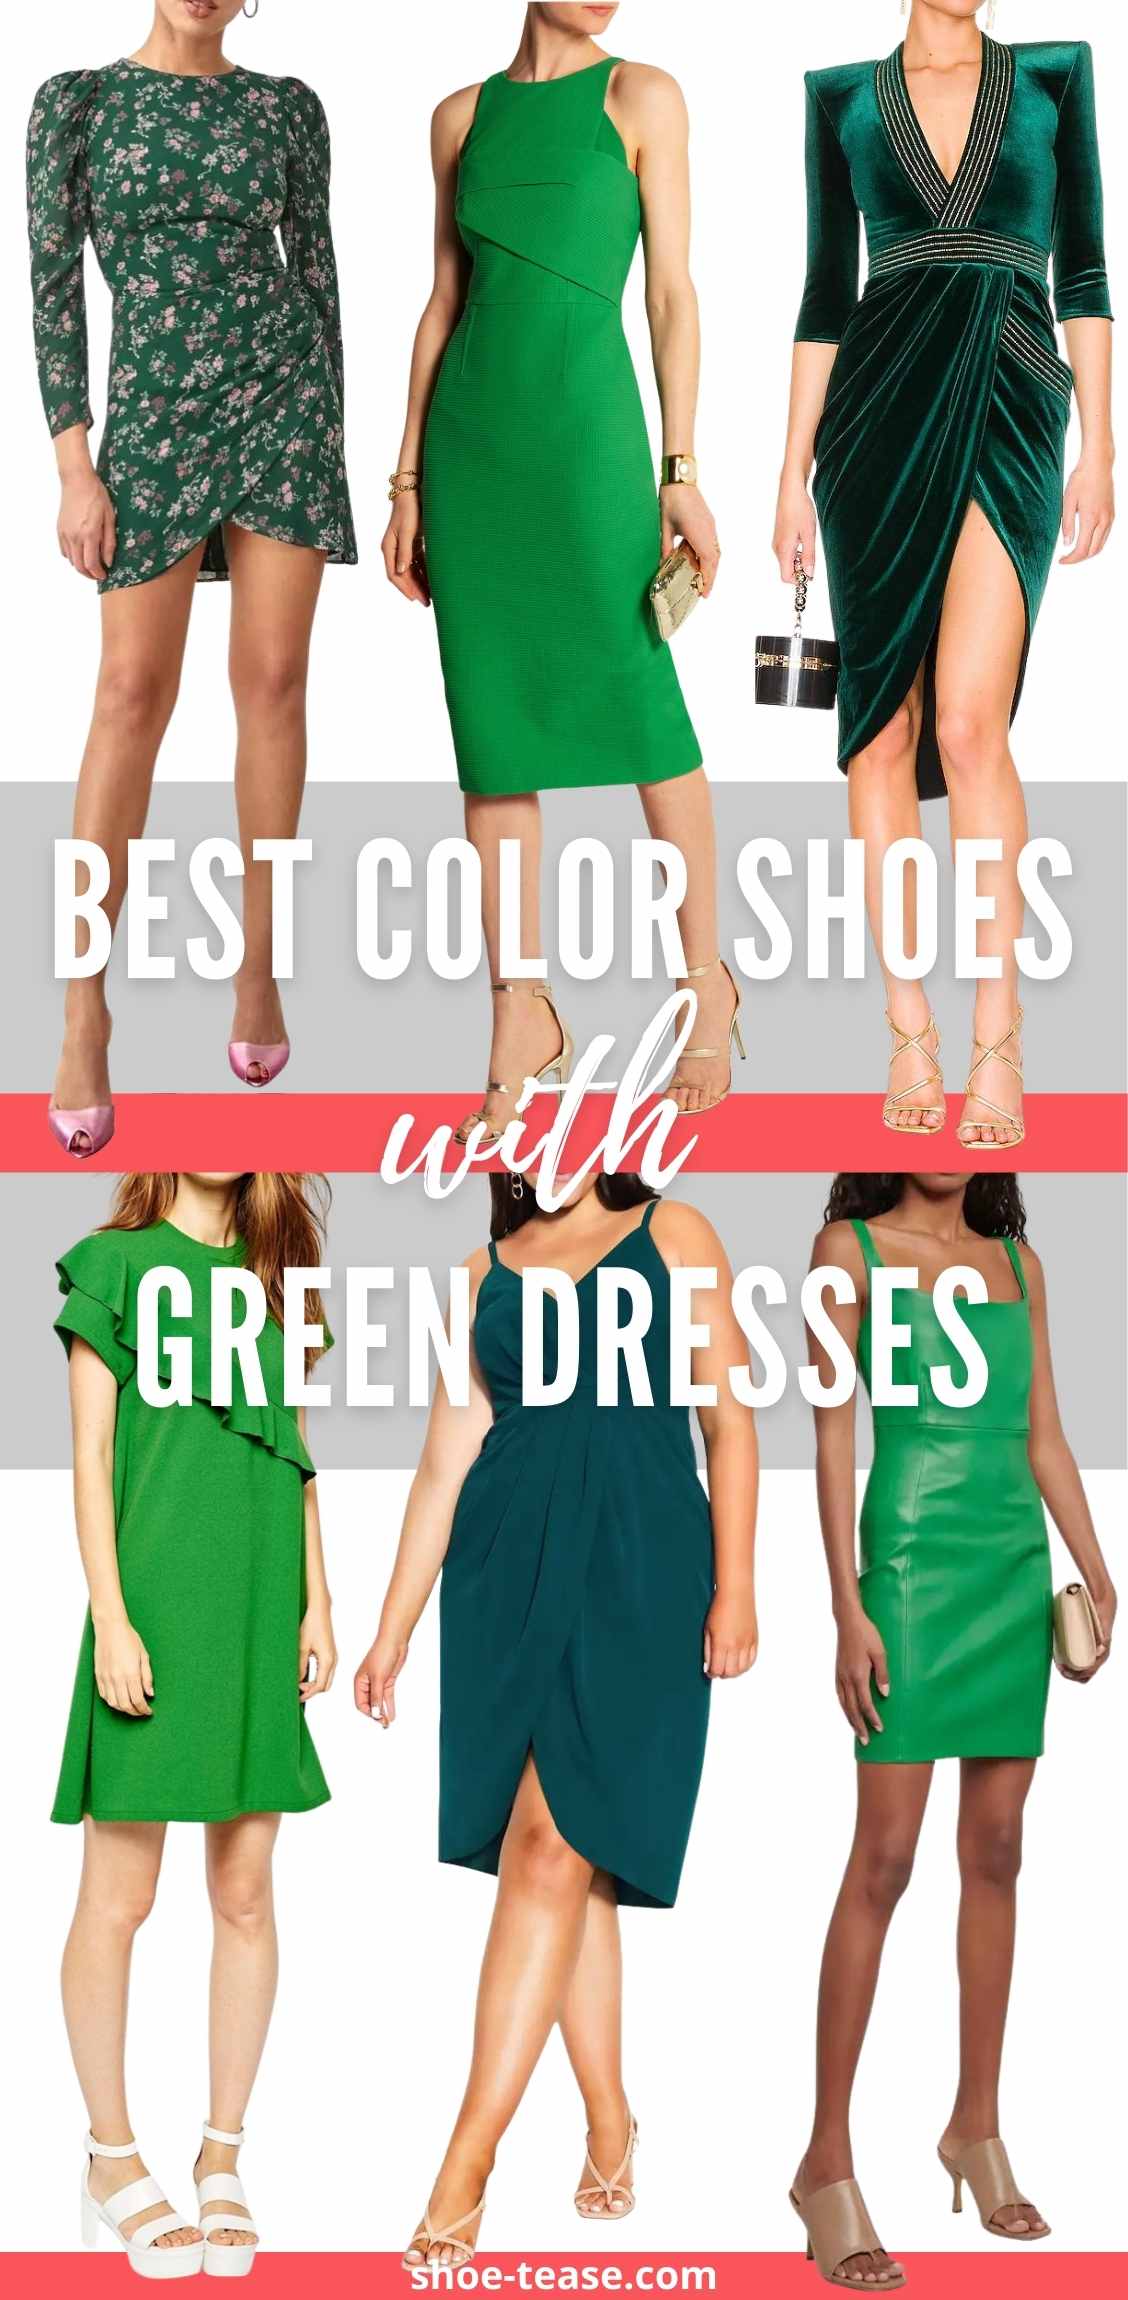 What Color shoes to wear with green dress outfits.jpg